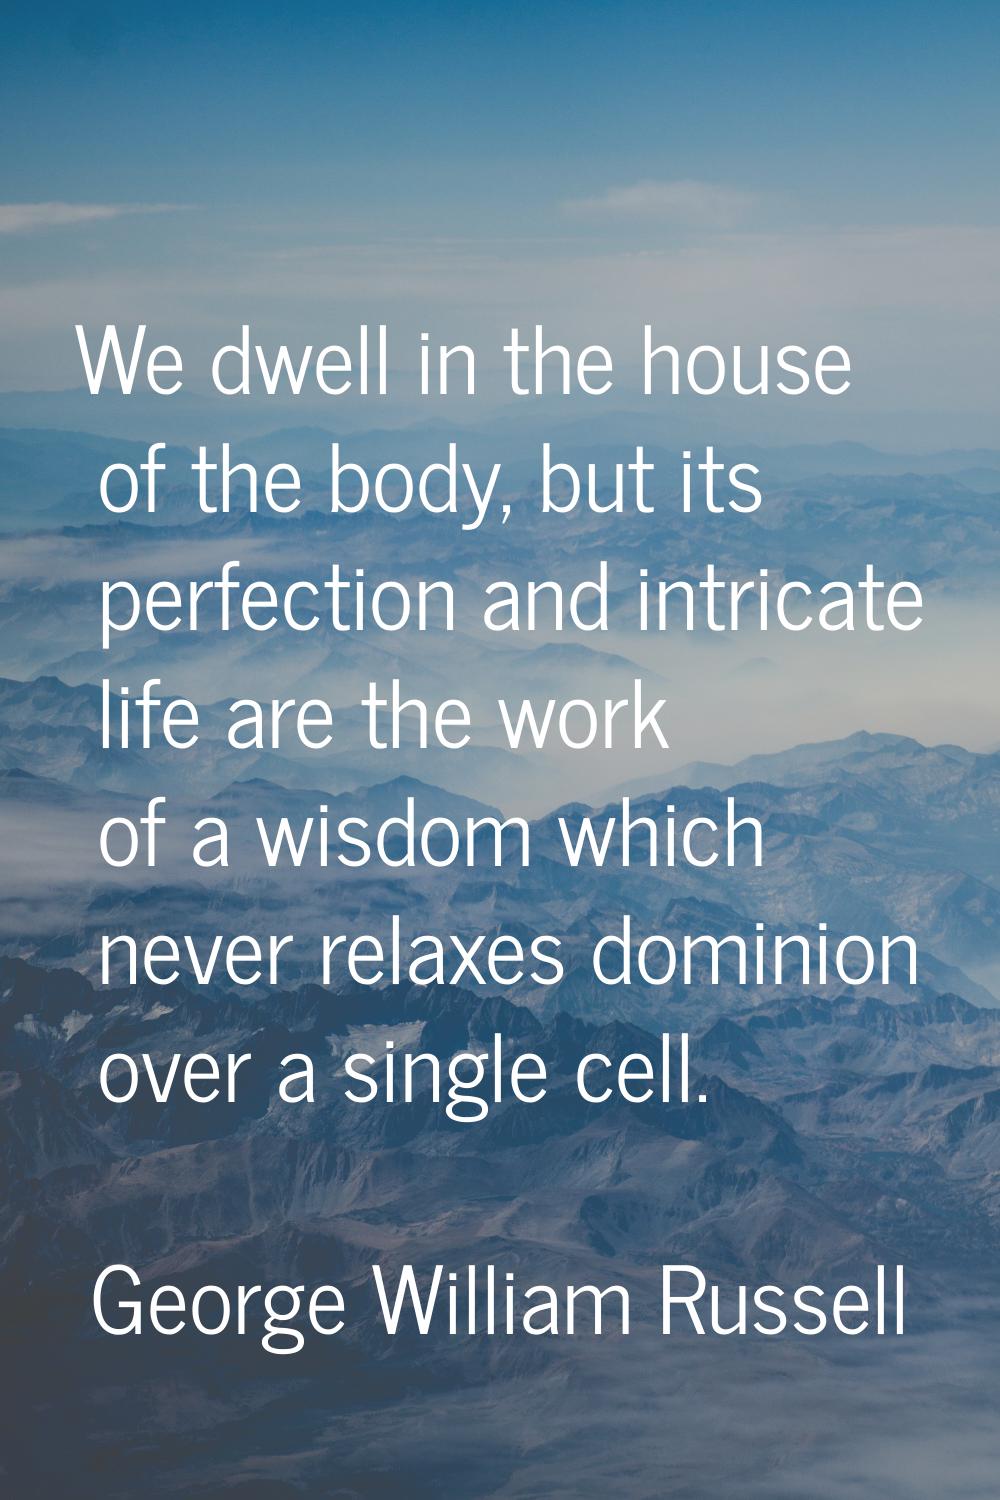 We dwell in the house of the body, but its perfection and intricate life are the work of a wisdom w